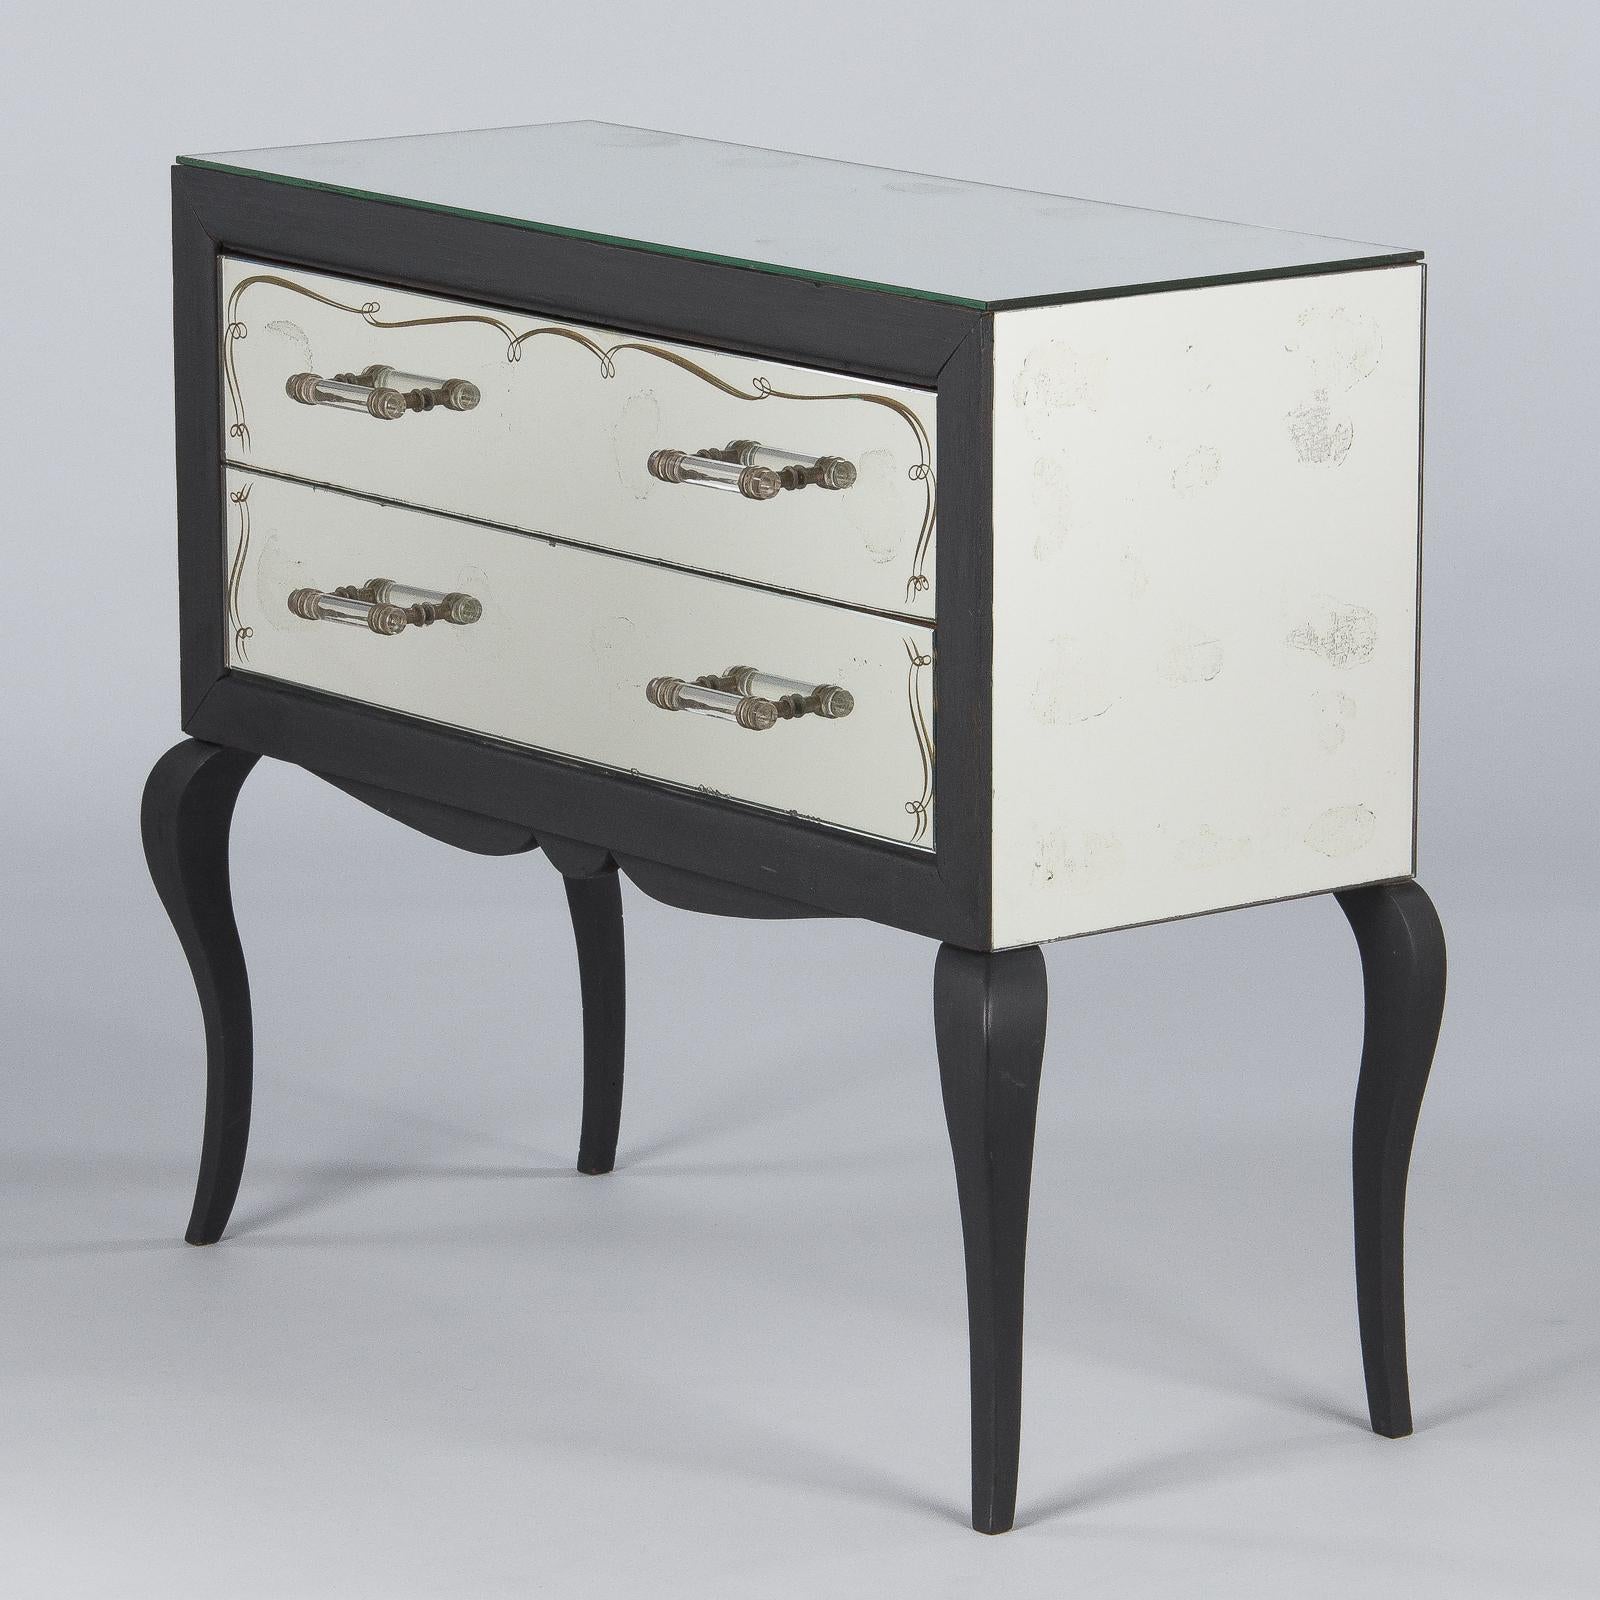 Mid-20th Century French Midcentury Venetian Mirrored Glass Chest with Black Wooden Frame, 1950s